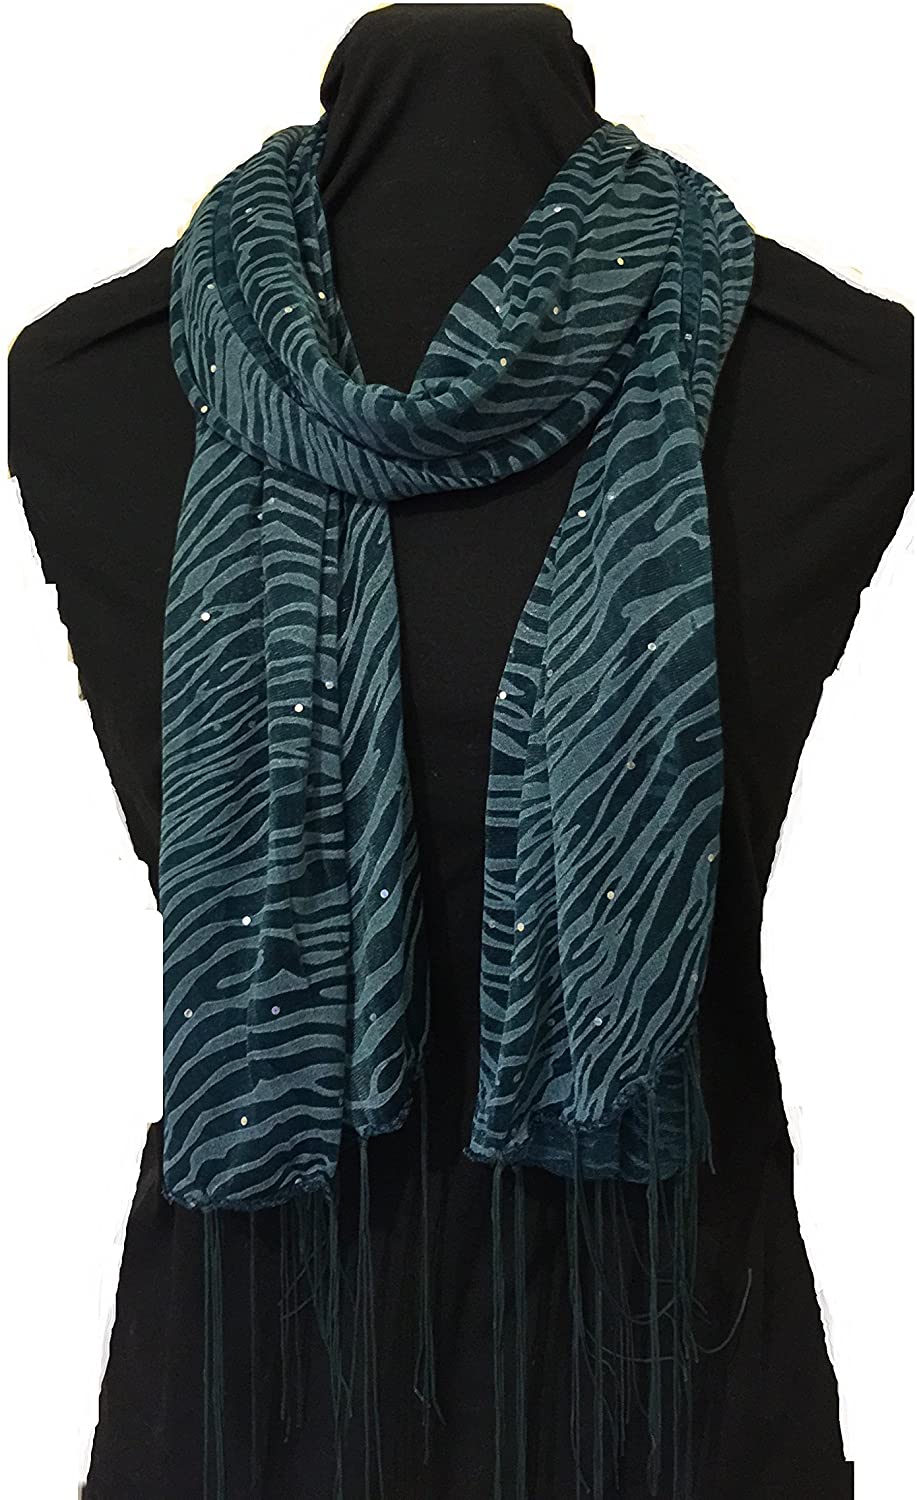 Pamper Yourself Now Green Zebra Print Long Thin Shiny Scarf with Pretty Sparkly Lovely for Evening wear